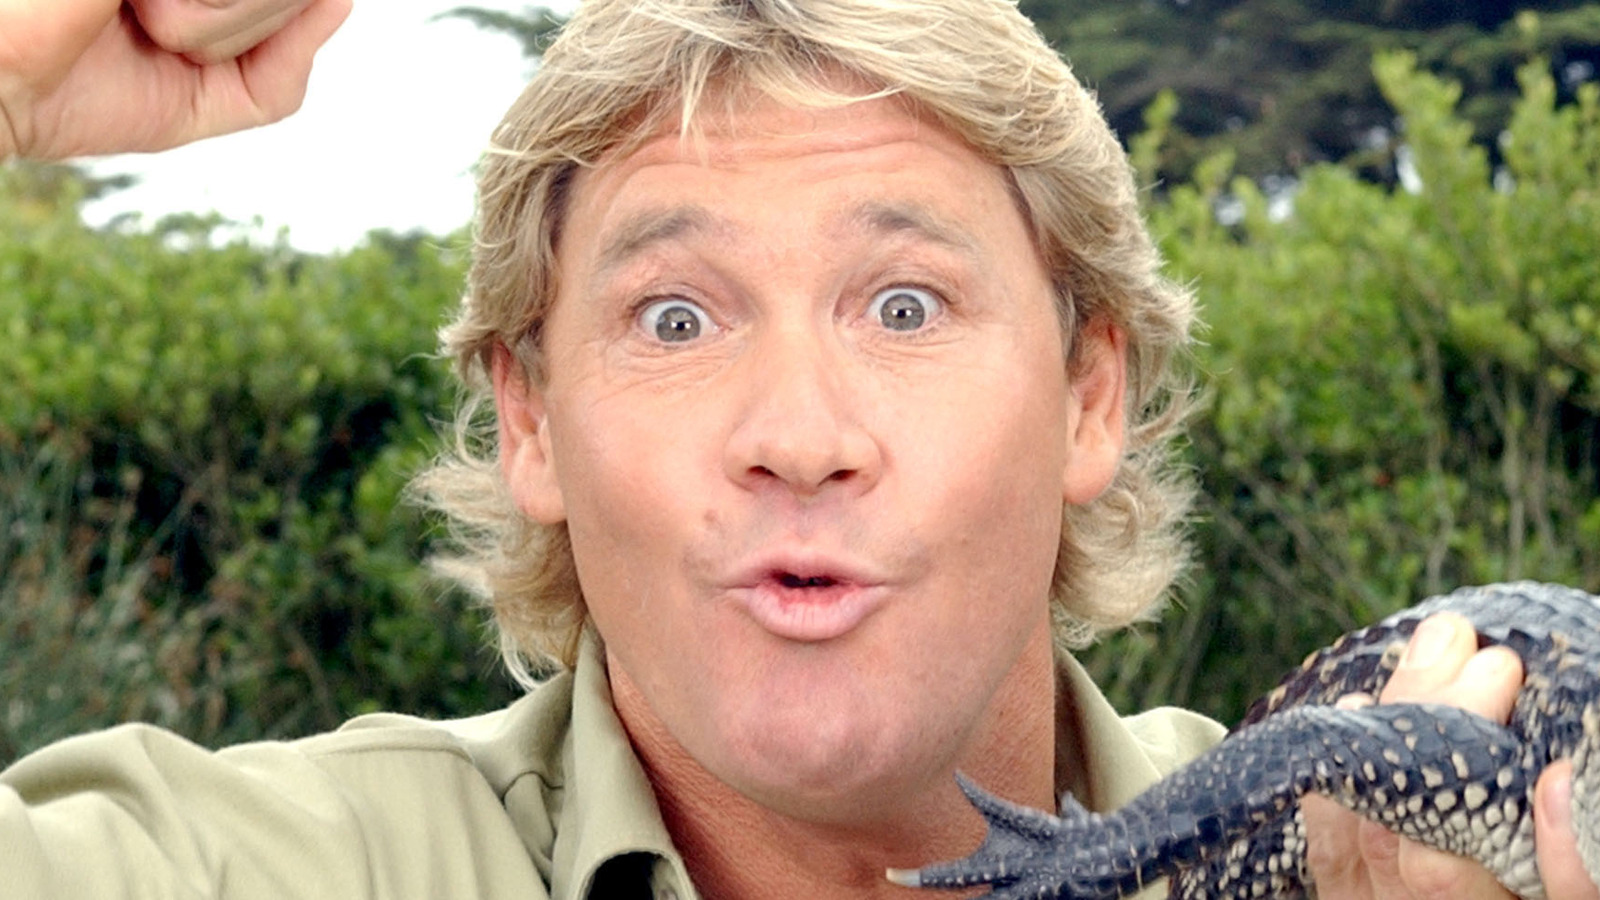 Little-Known Facts About Steve Irwin The Crocodile Hunter